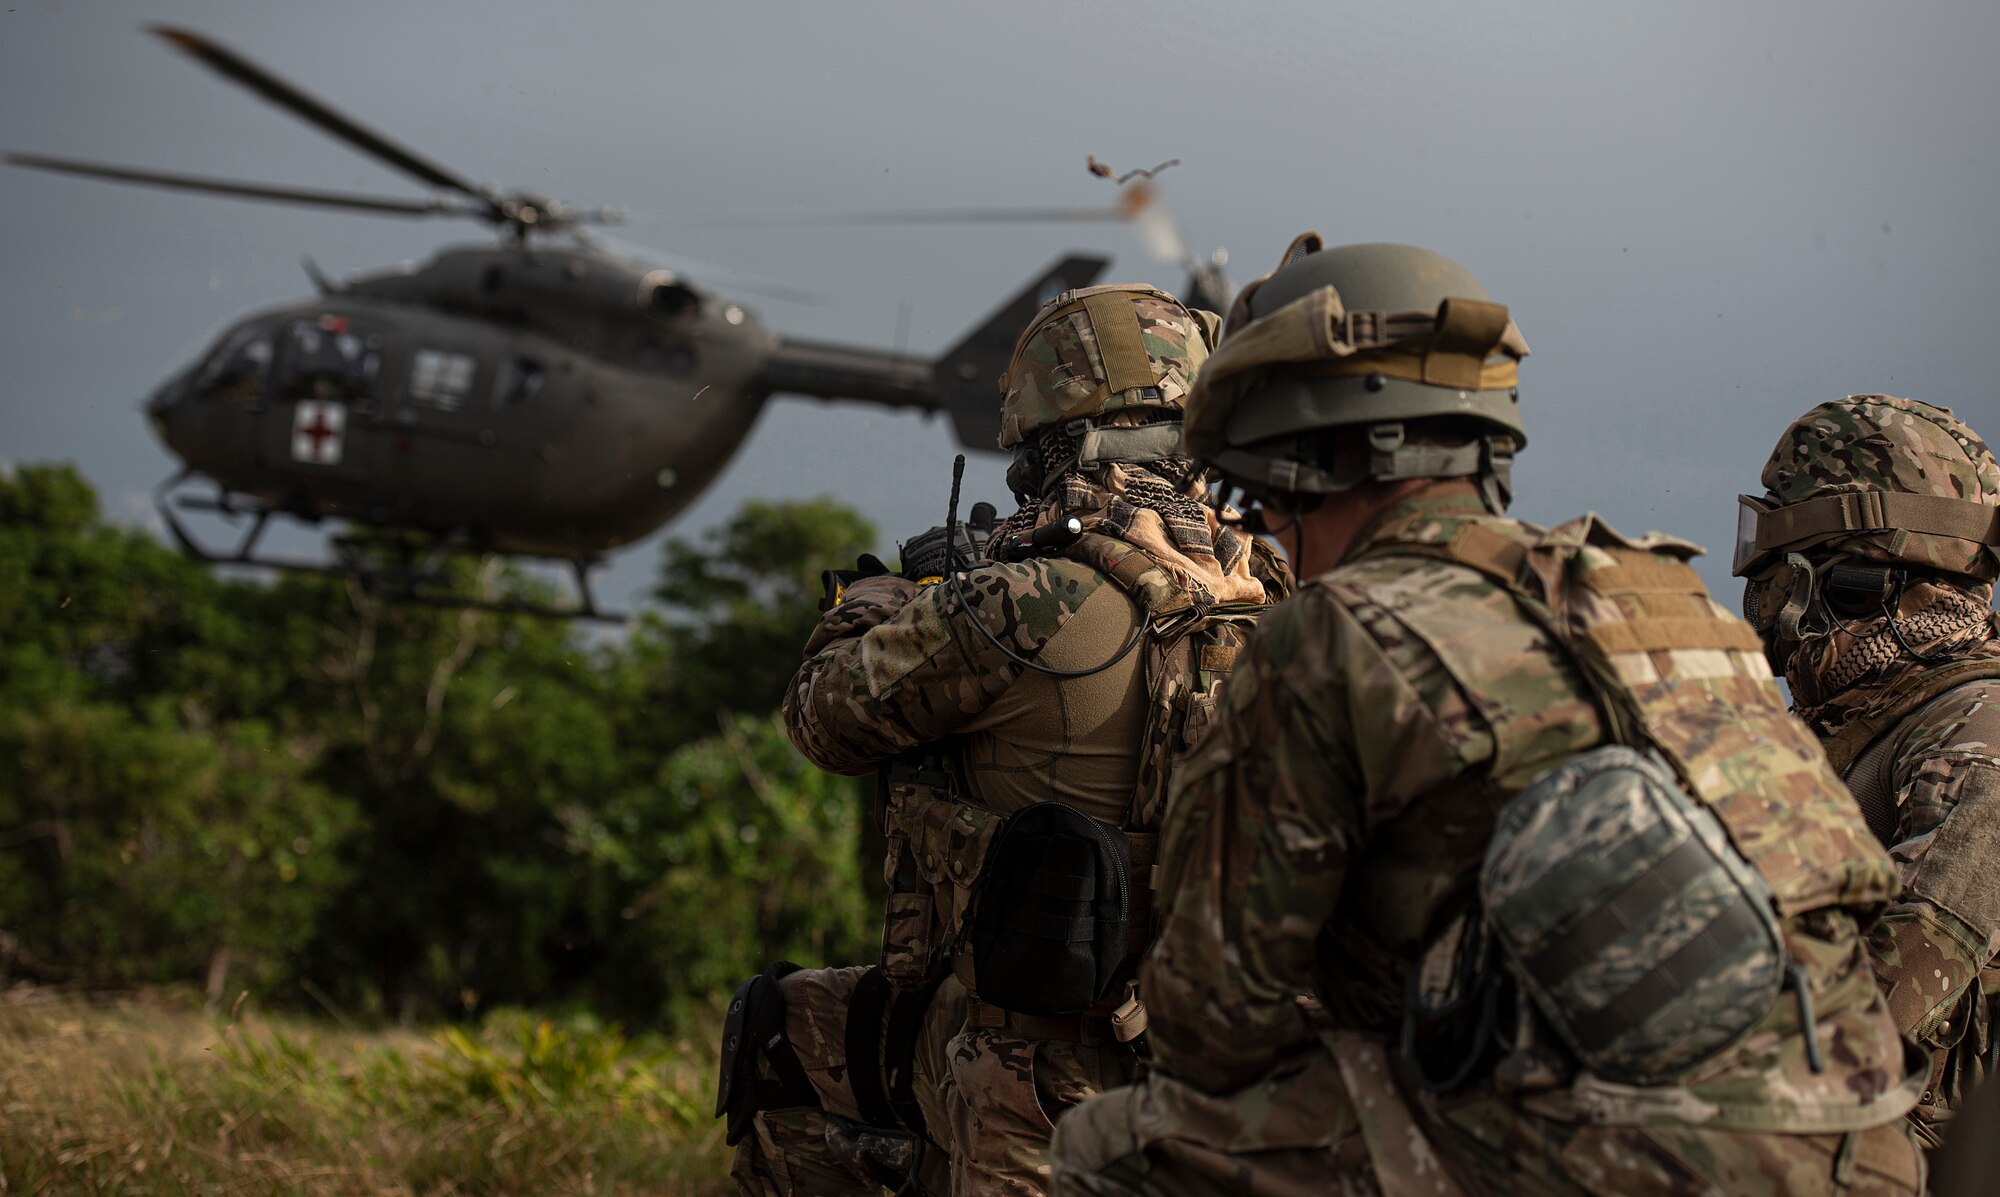 Multi-capable Airmen of the 644th Combat Communications Squadron prepare to assist an emergency airlift with the Guam Army National Guard medical helicopter during Exercise Dragon Shield at Northwest Field, Guam, January 13, 2021.